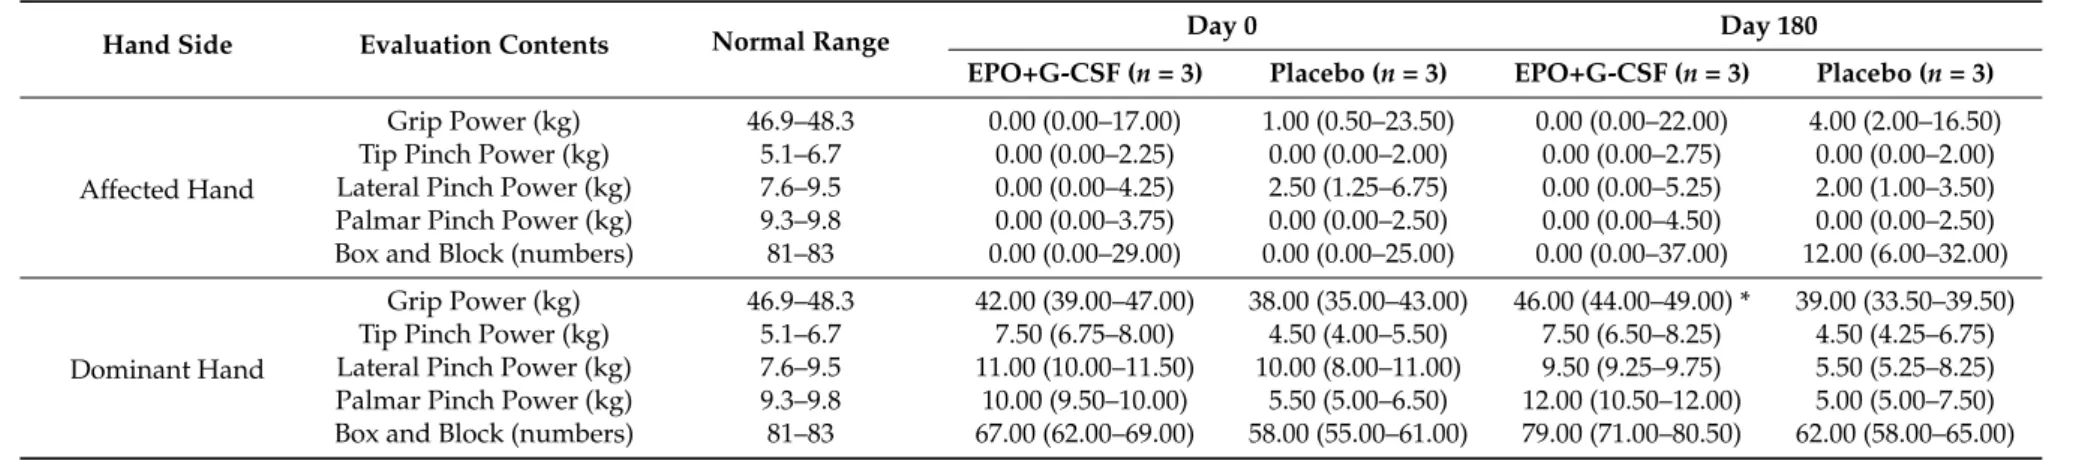 Table 5. Hand function outcomes of the EPO and G-CSF combination therapy in an exploratory double-blind study.